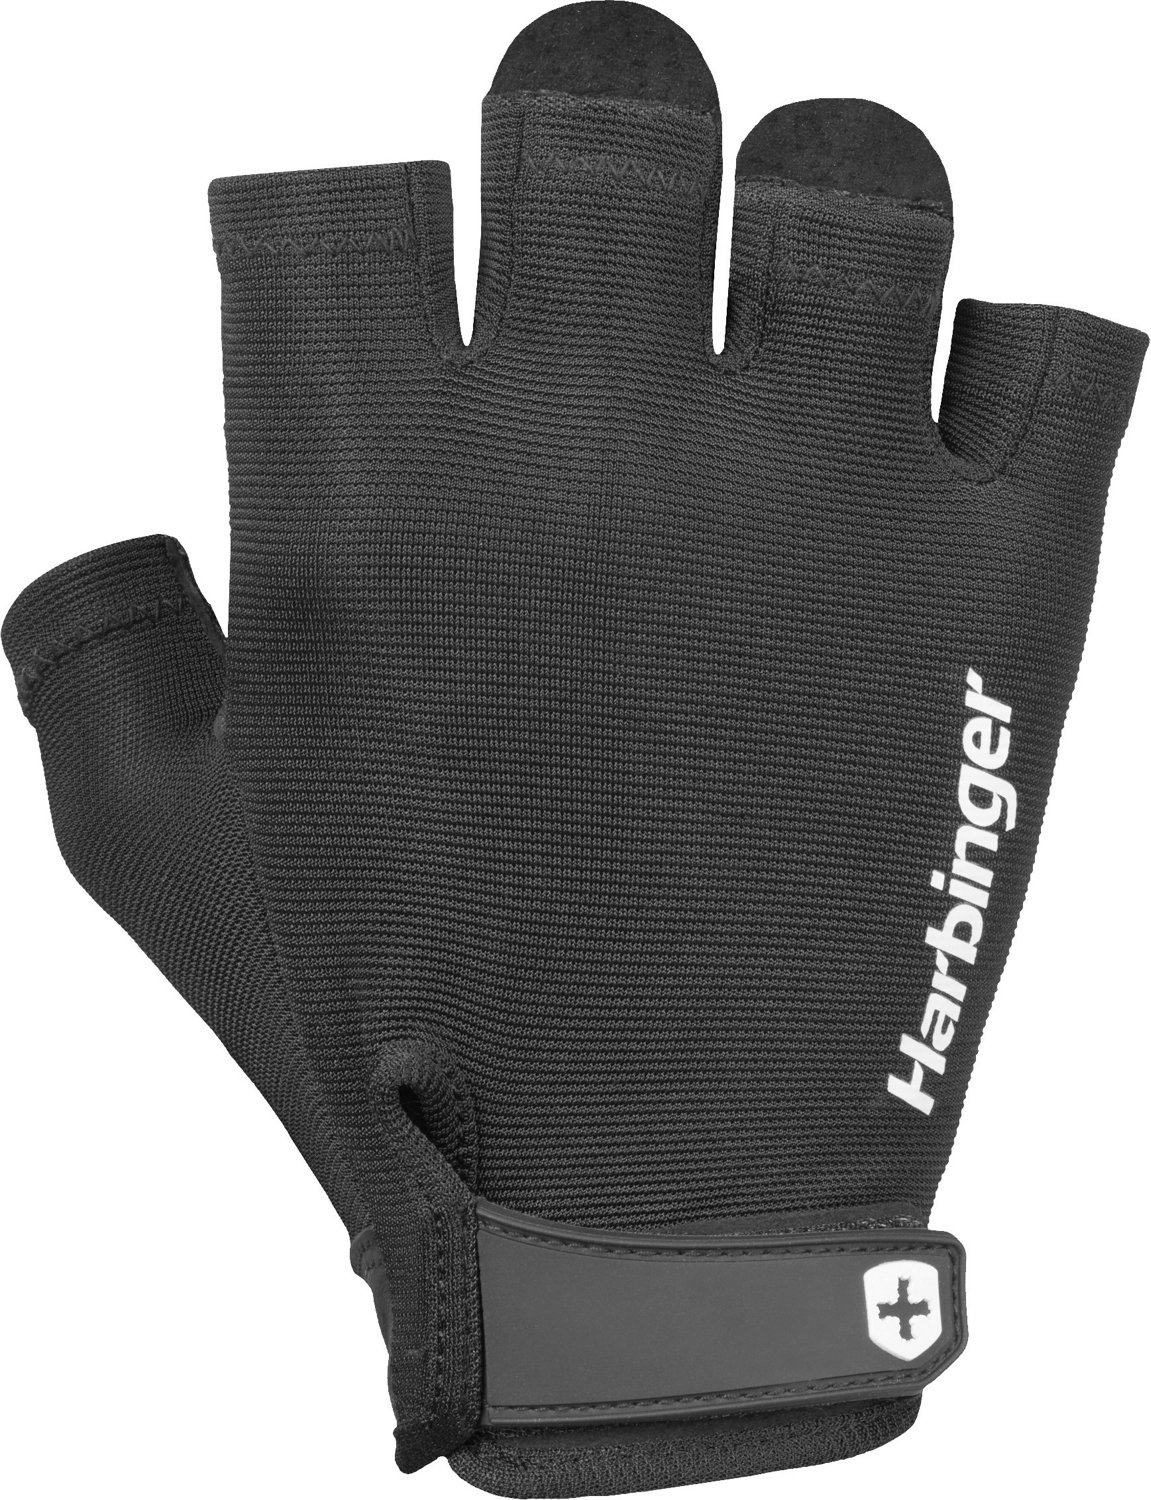 Buy Gym Gloves for Women  Weightlifting Fitness Gloves - HUSTLERS